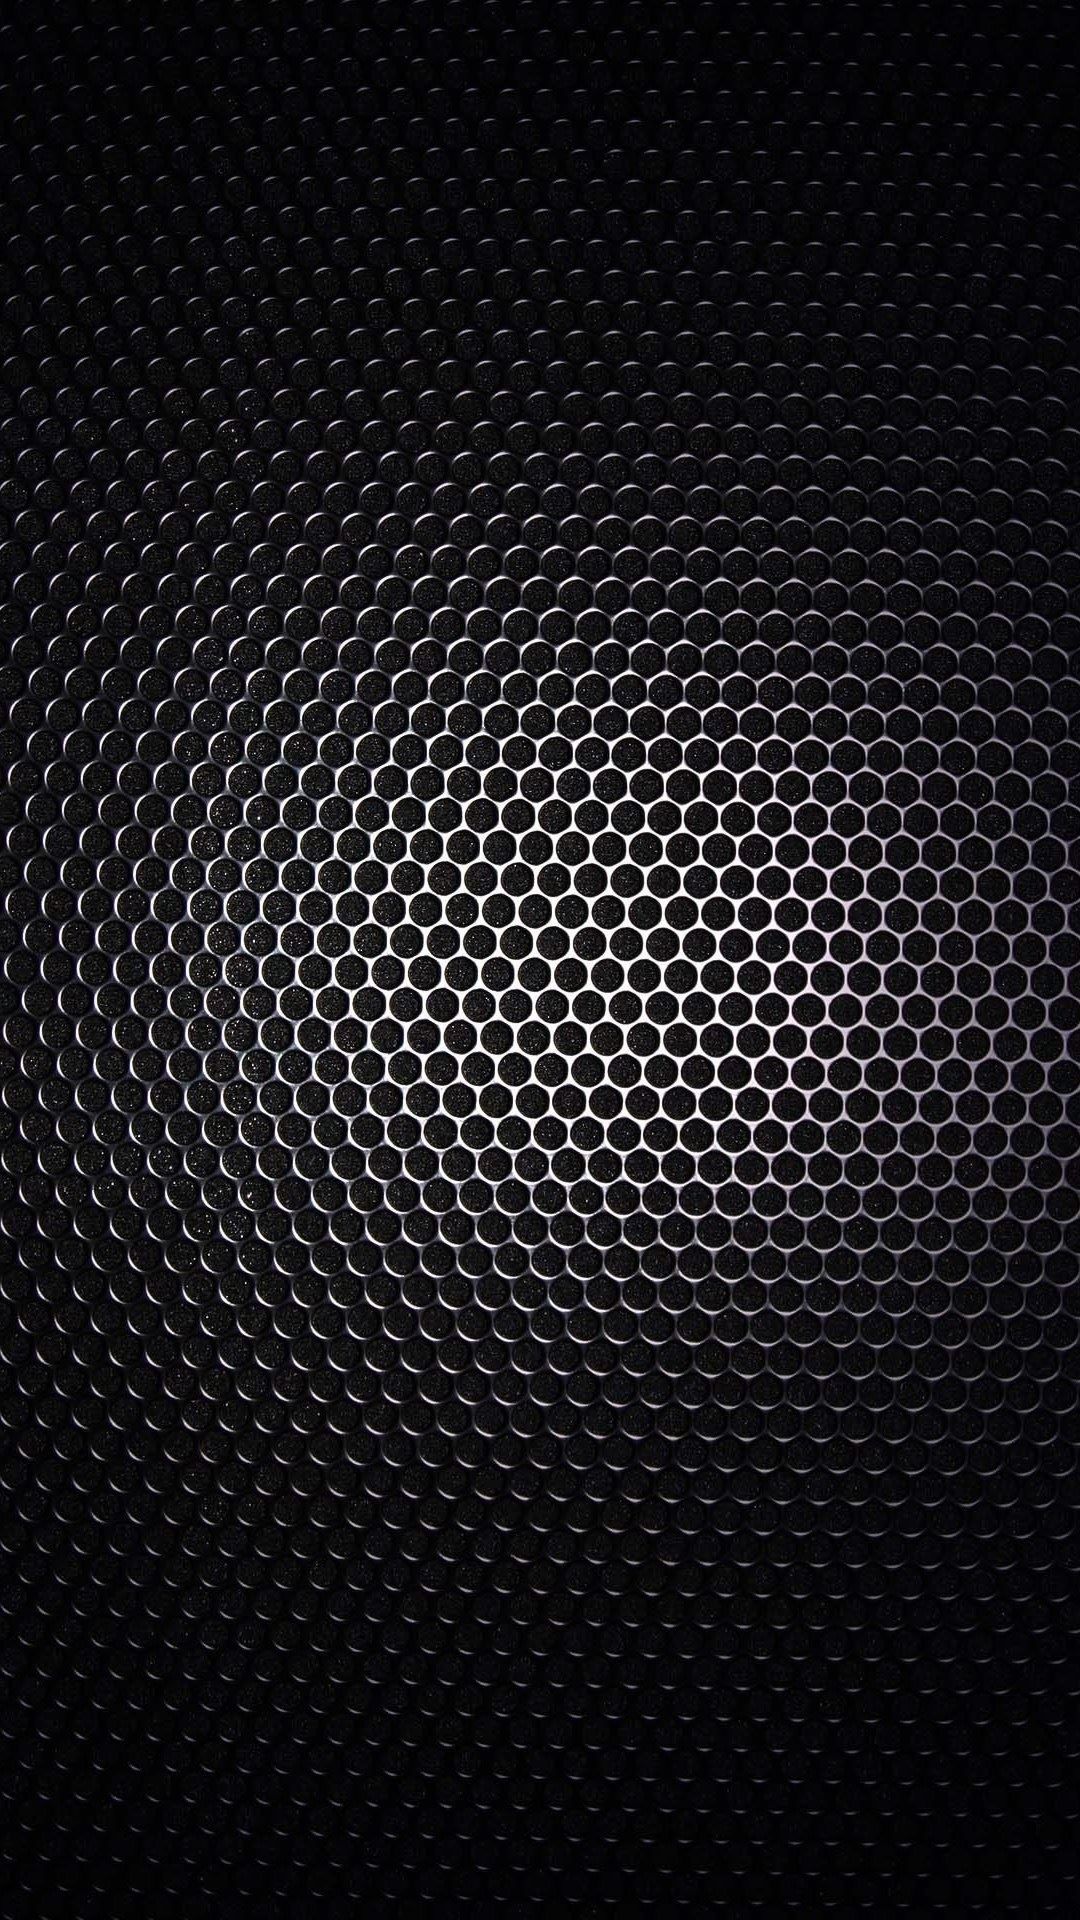 Dark Metal Grid Pattern wallpaper Android Backgrounds